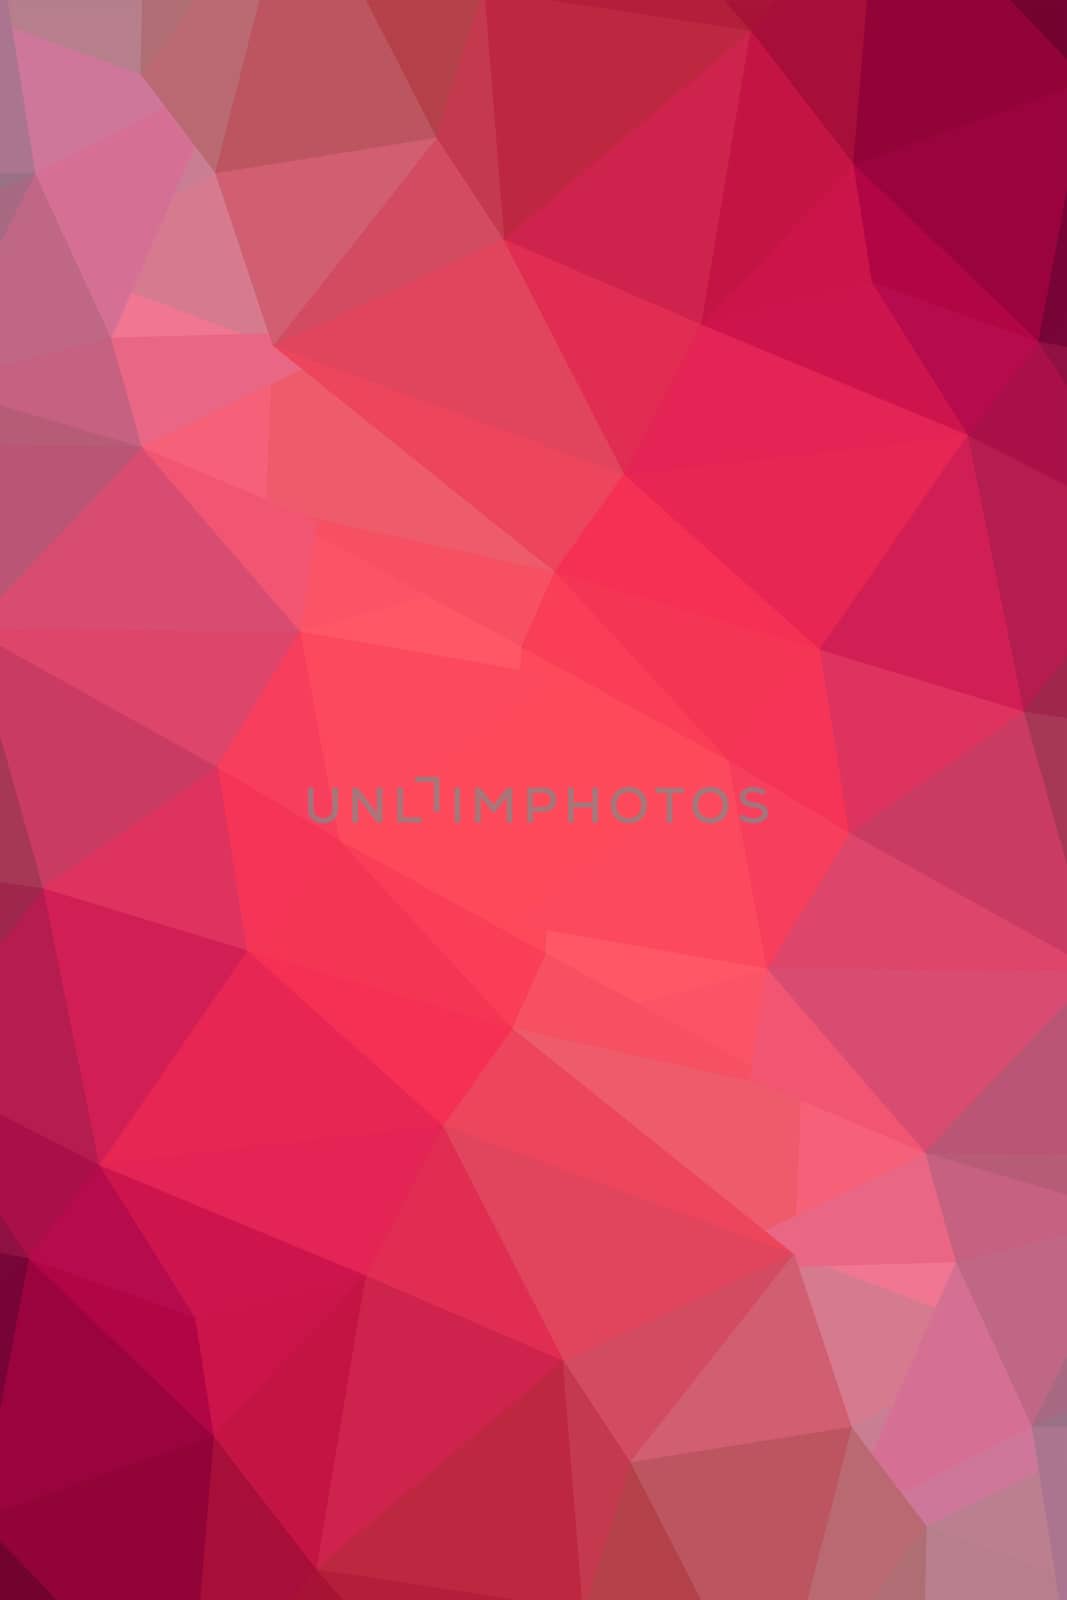 Pink Geometry Background by welcomia